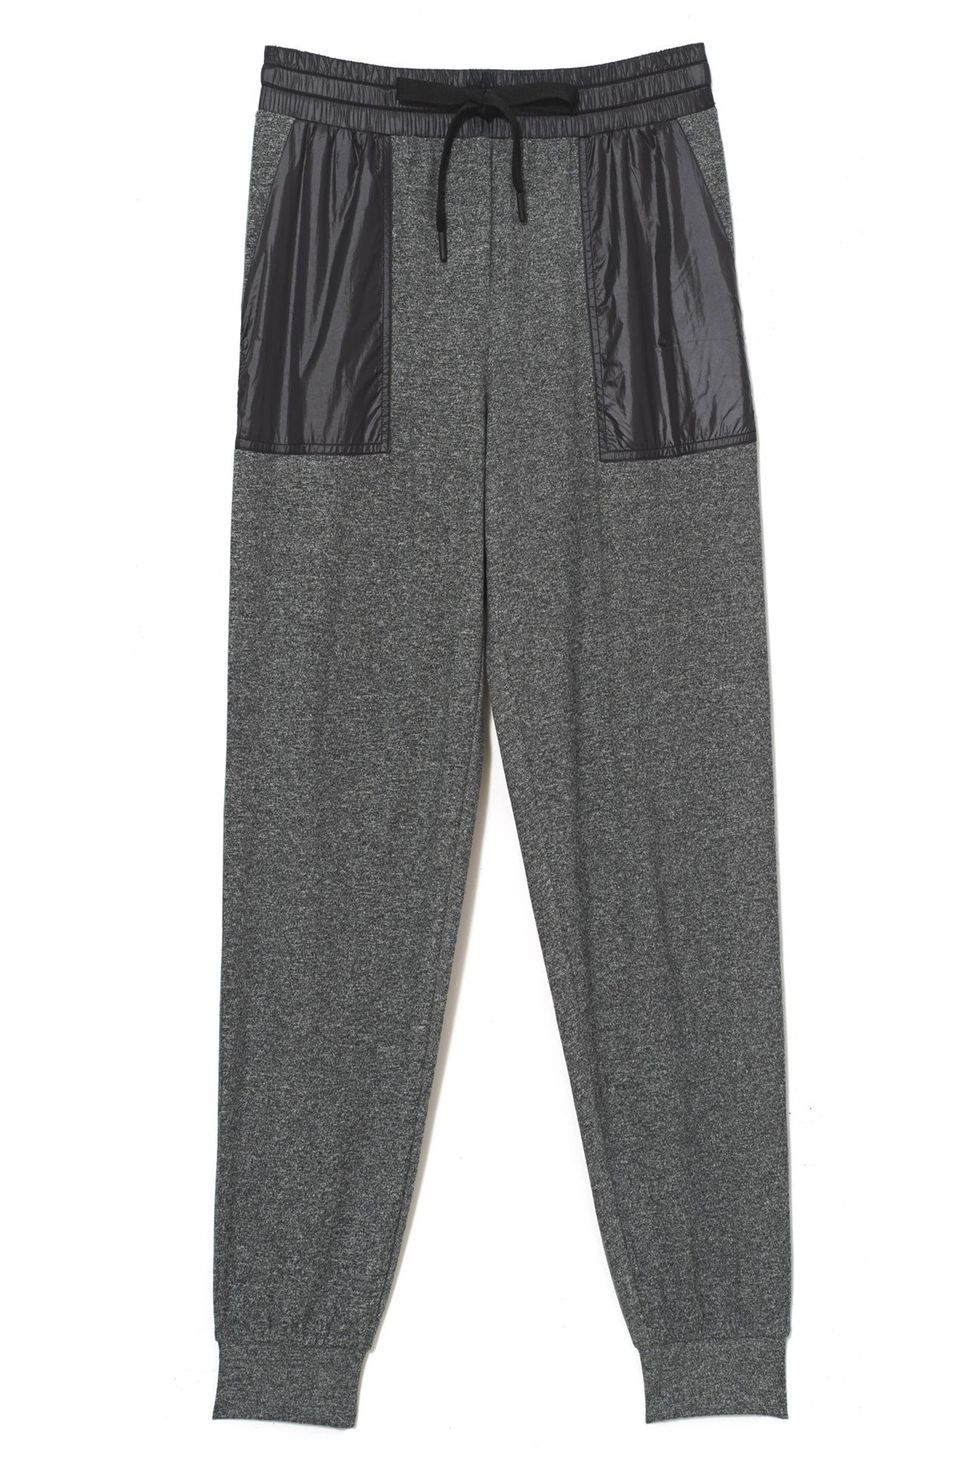 5 Pairs of Elastic Waist Pants That Are Actually Cute